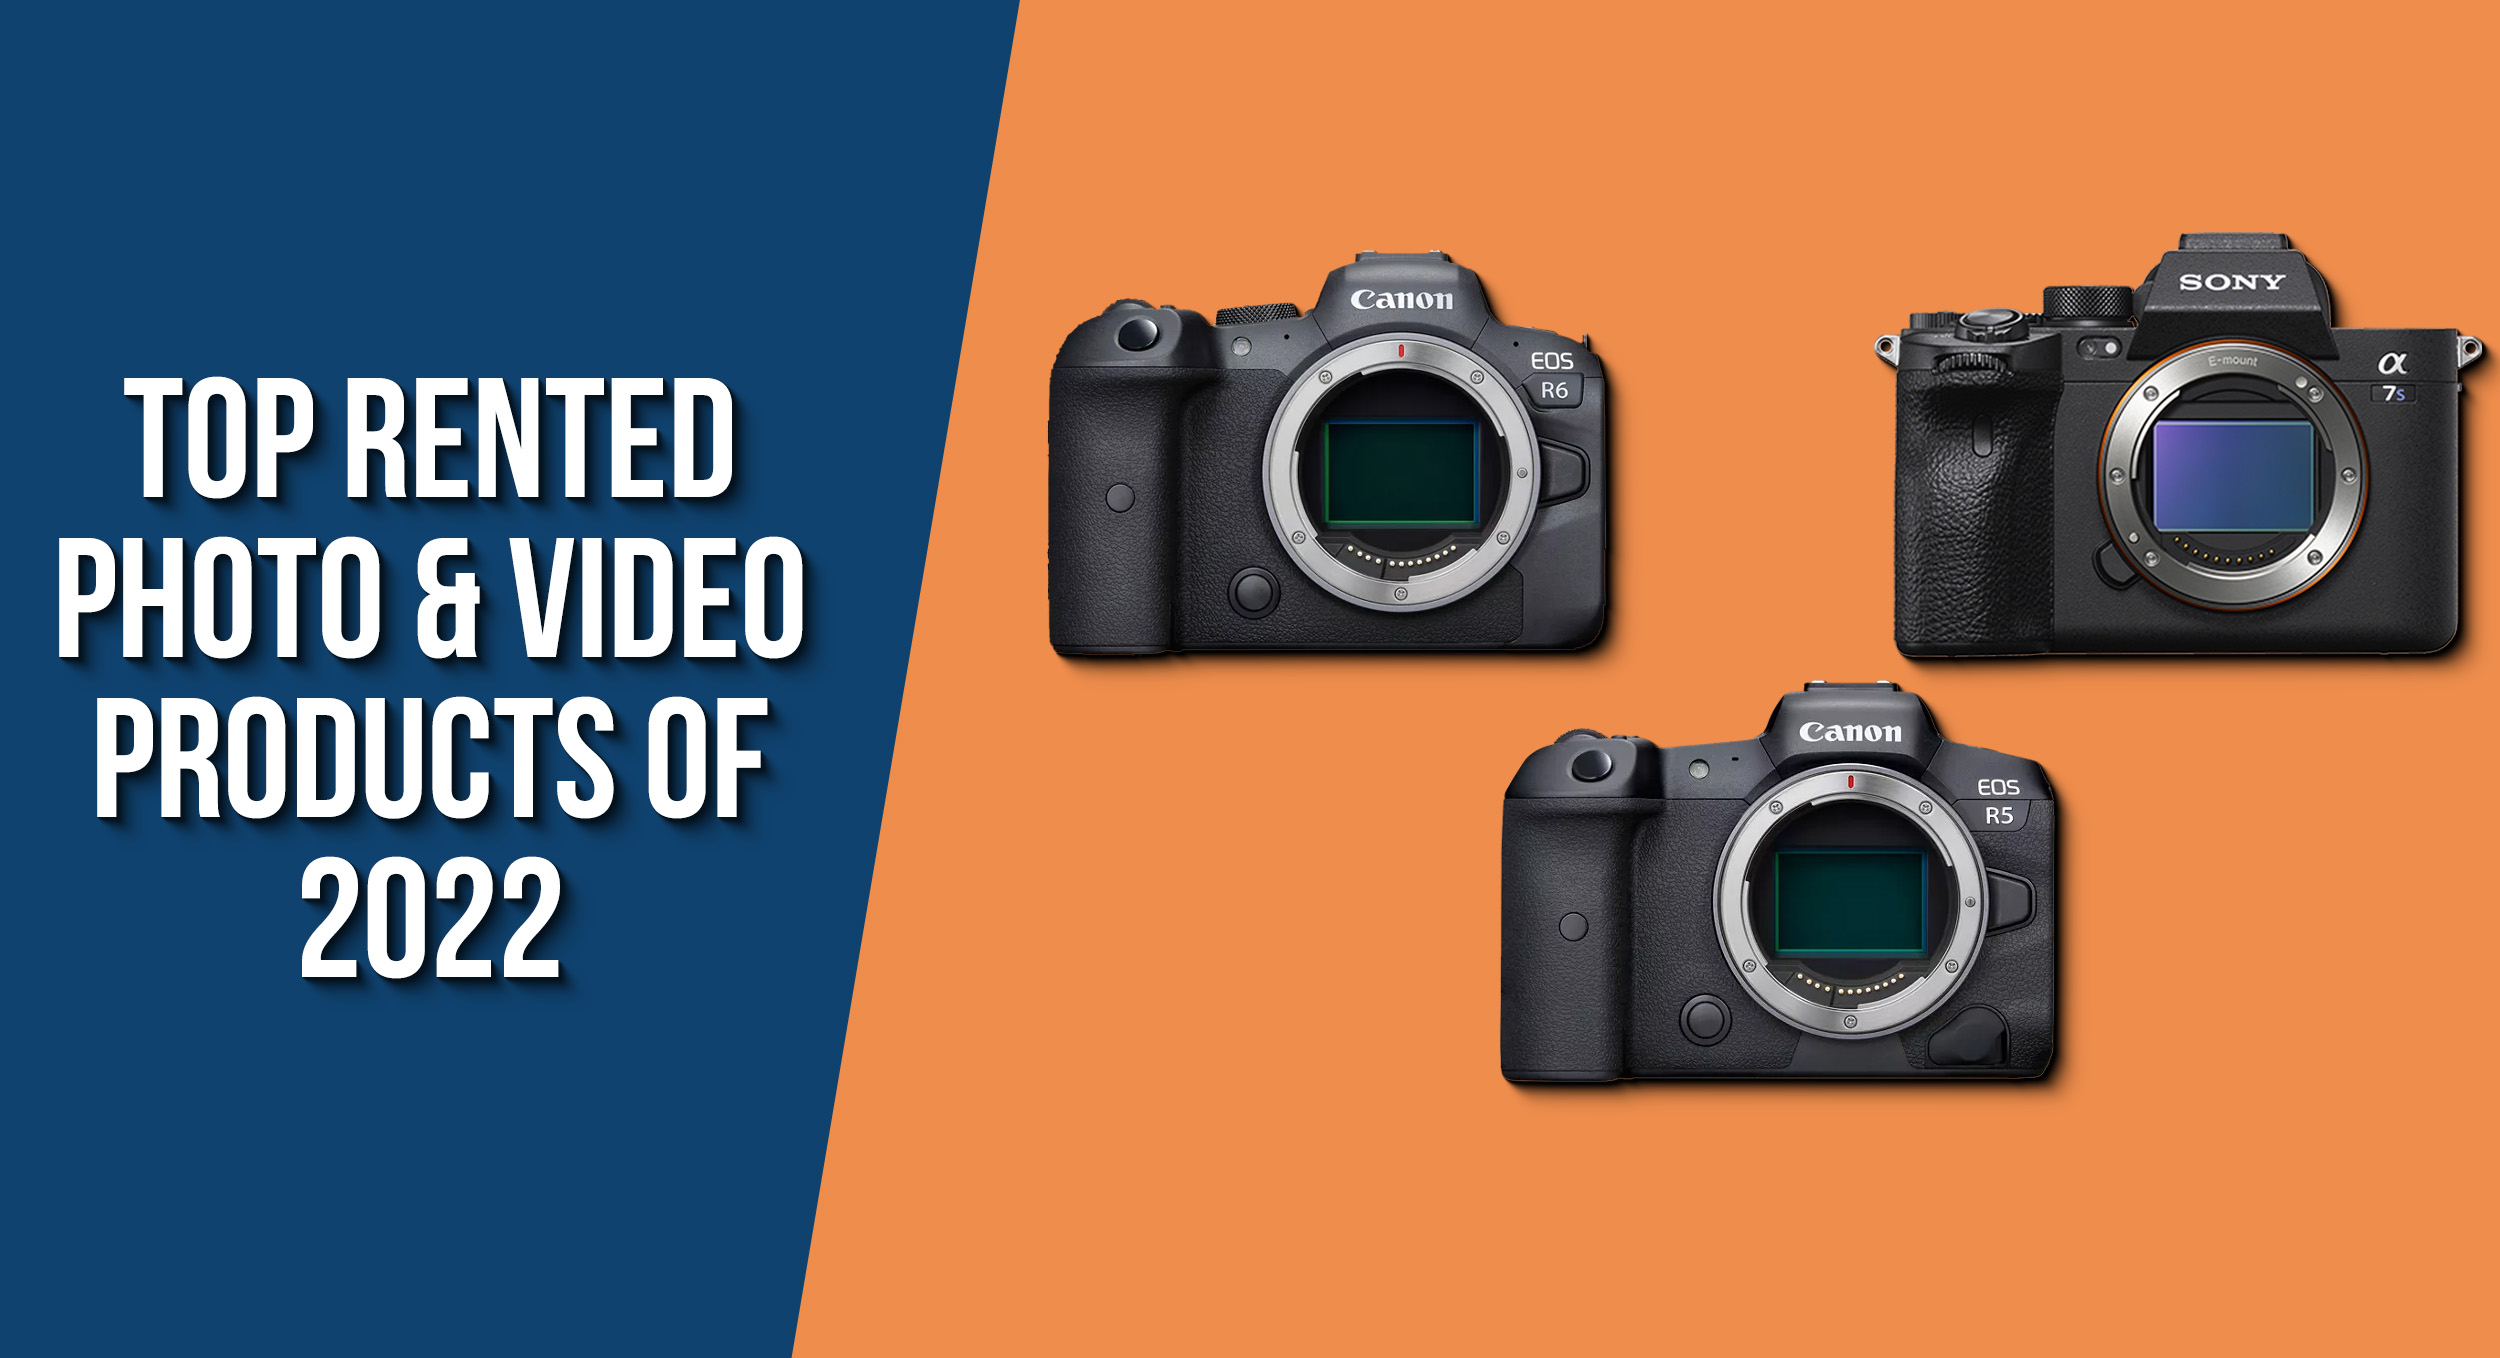 What were the most borrowed cameras and lenses in 2022?